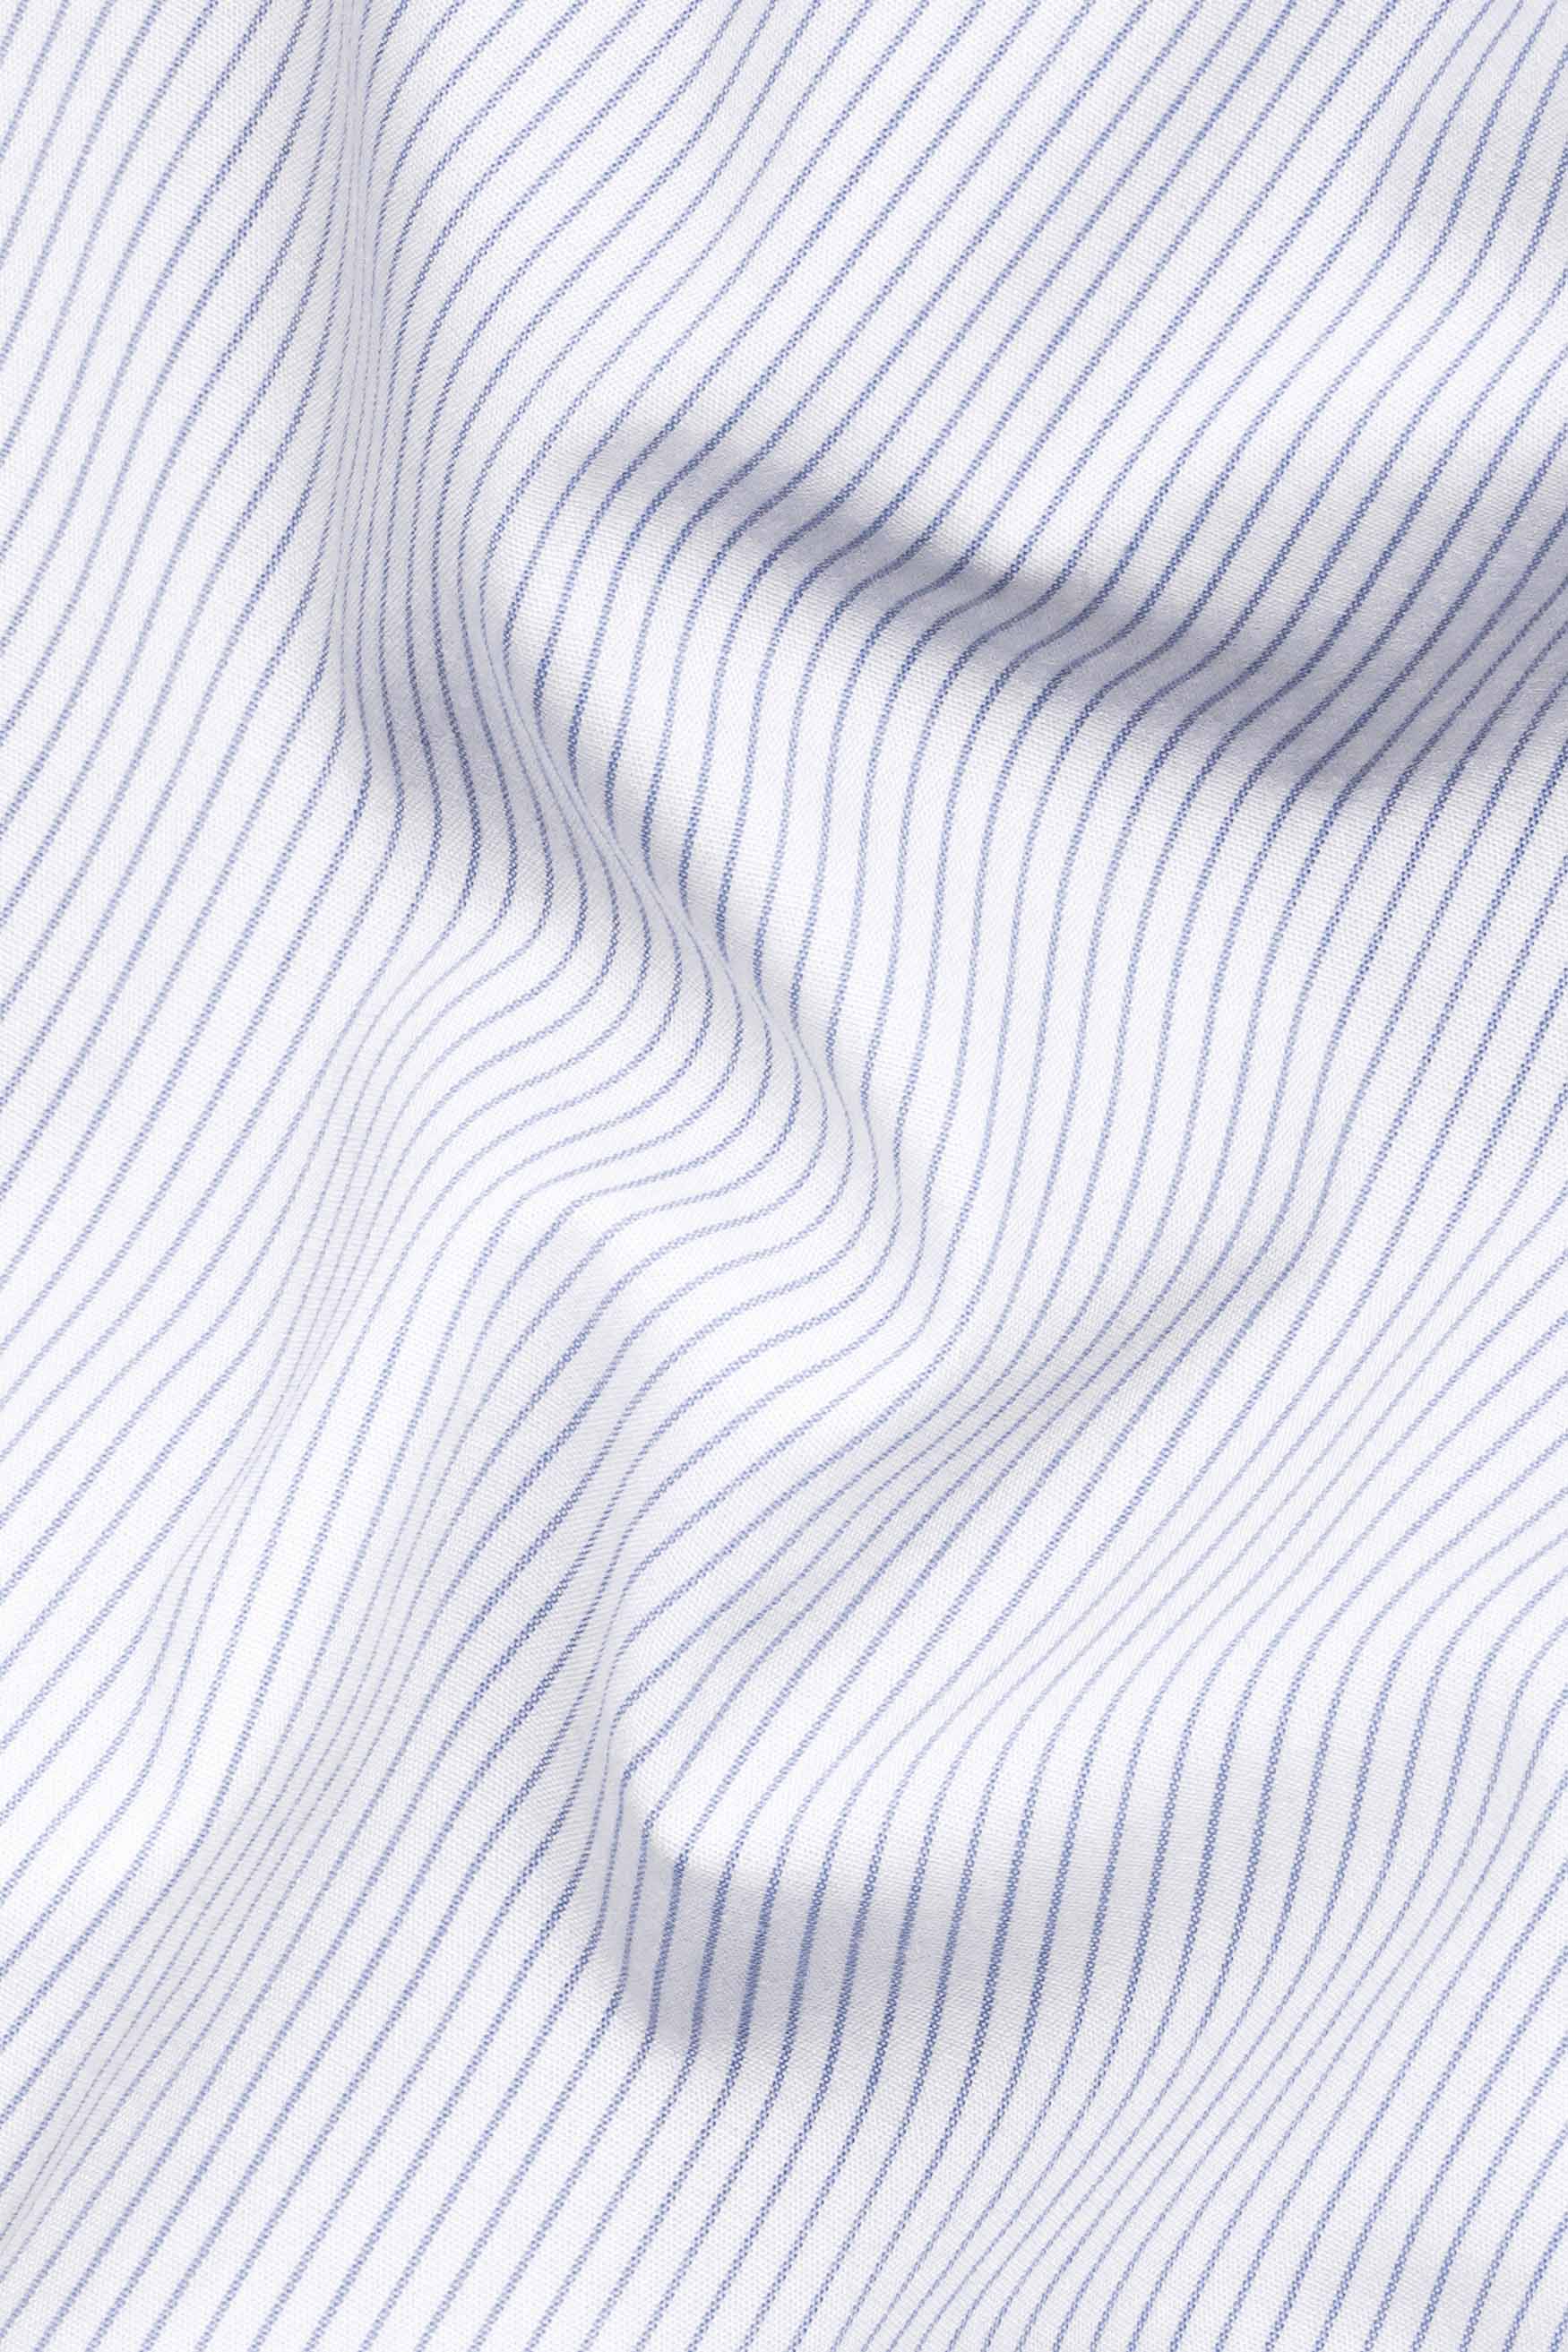 Bright White and Yonder Blue Pin Striped Premium Cotton Shirt 11572-CA-38, 11572-CA-H-38, 11572-CA-39, 11572-CA-H-39, 11572-CA-40, 11572-CA-H-40, 11572-CA-42, 11572-CA-H-42, 11572-CA-44, 11572-CA-H-44, 11572-CA-46, 11572-CA-H-46, 11572-CA-48, 11572-CA-H-48, 11572-CA-50, 11572-CA-H-50, 11572-CA-52, 11572-CA-H-52